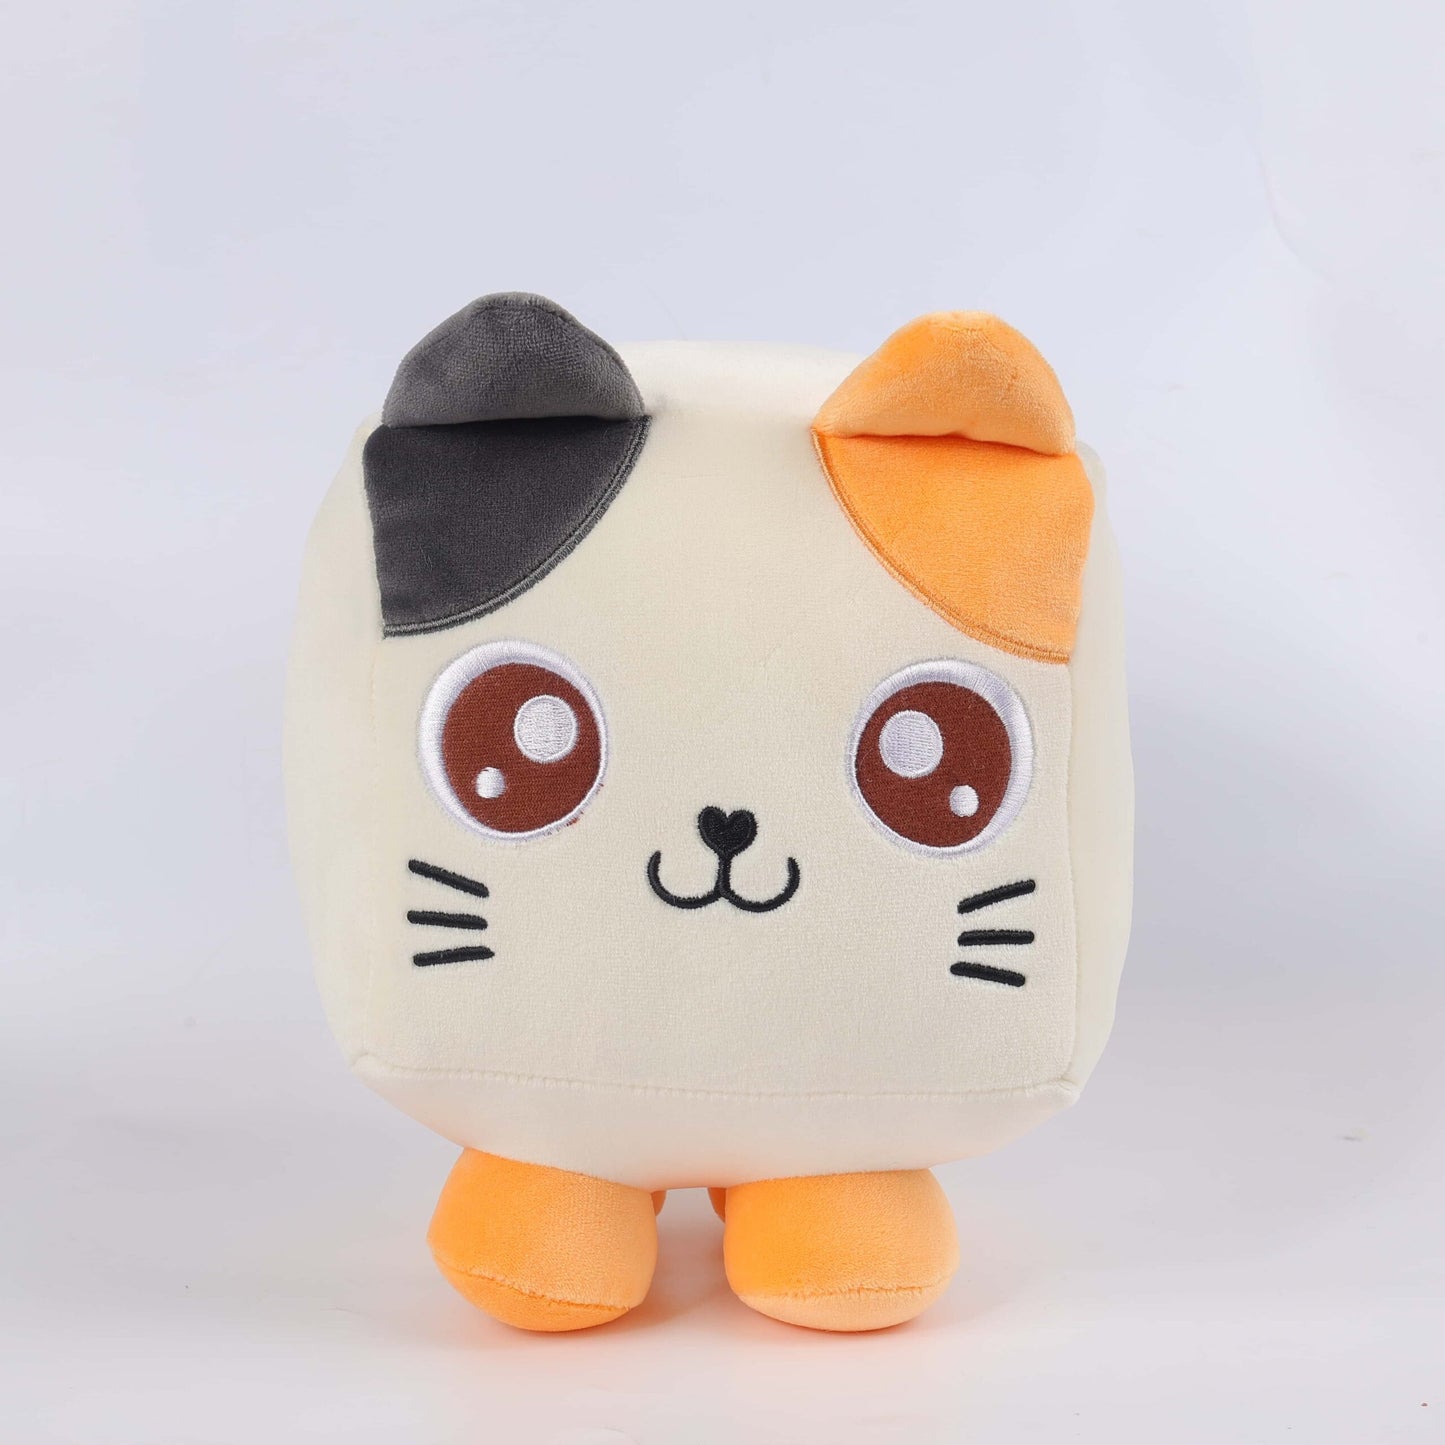 「Debut Sale」Cube Animal Plushie 2 Adorable Kitty Cat Cow Animal Cube Plushie Toy （Pre-order） - Aixini Toys